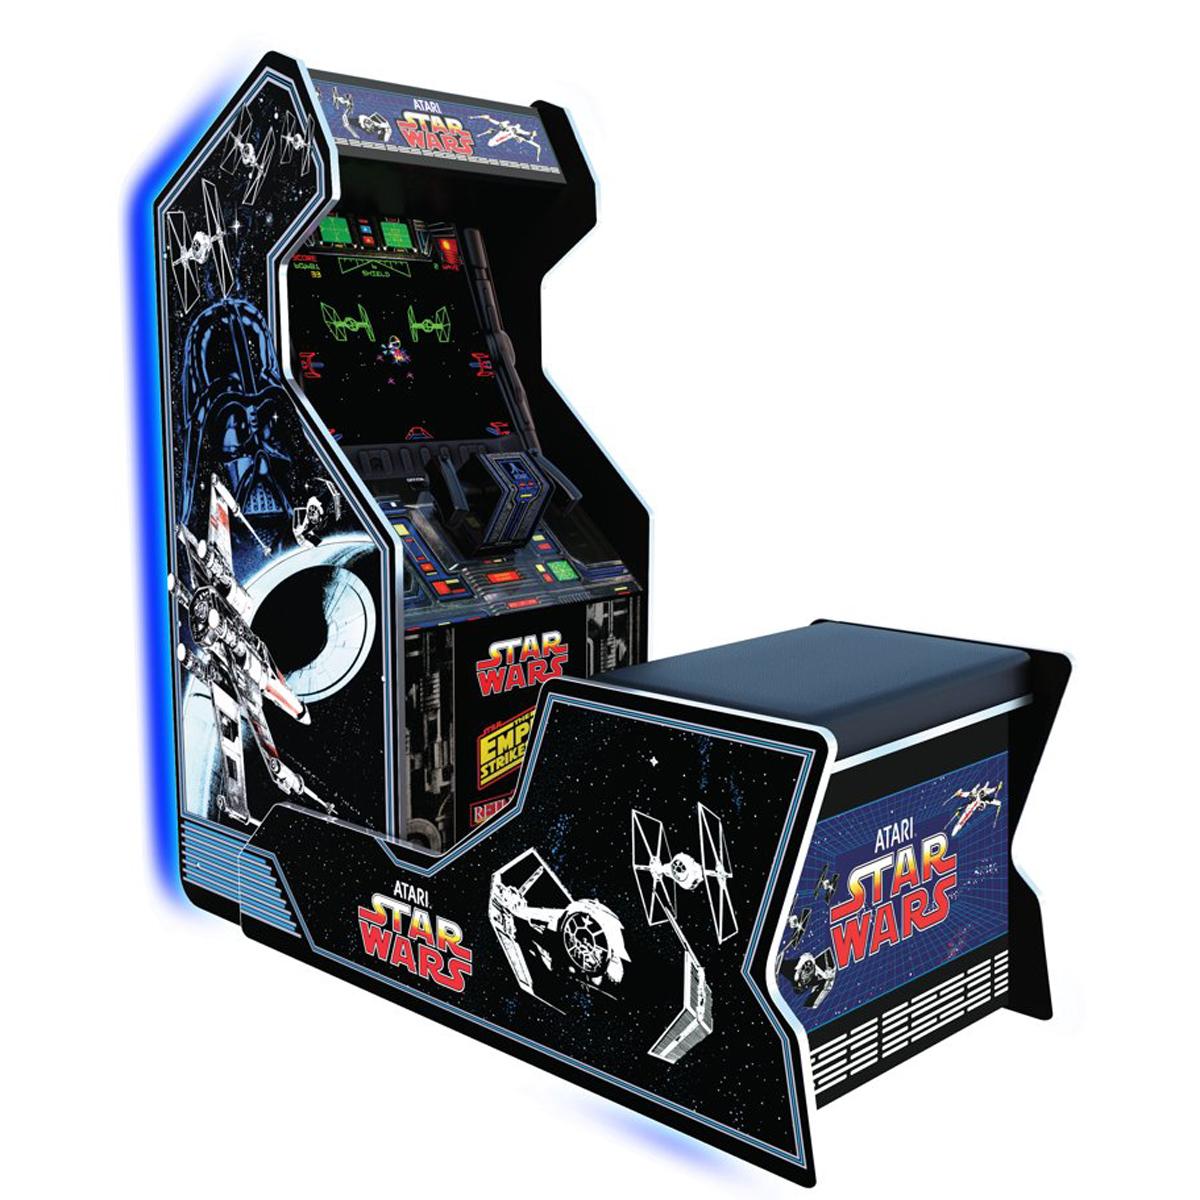 Arcade1Up Star Wars Arcade Machine with Bench Set for $399 Shipped